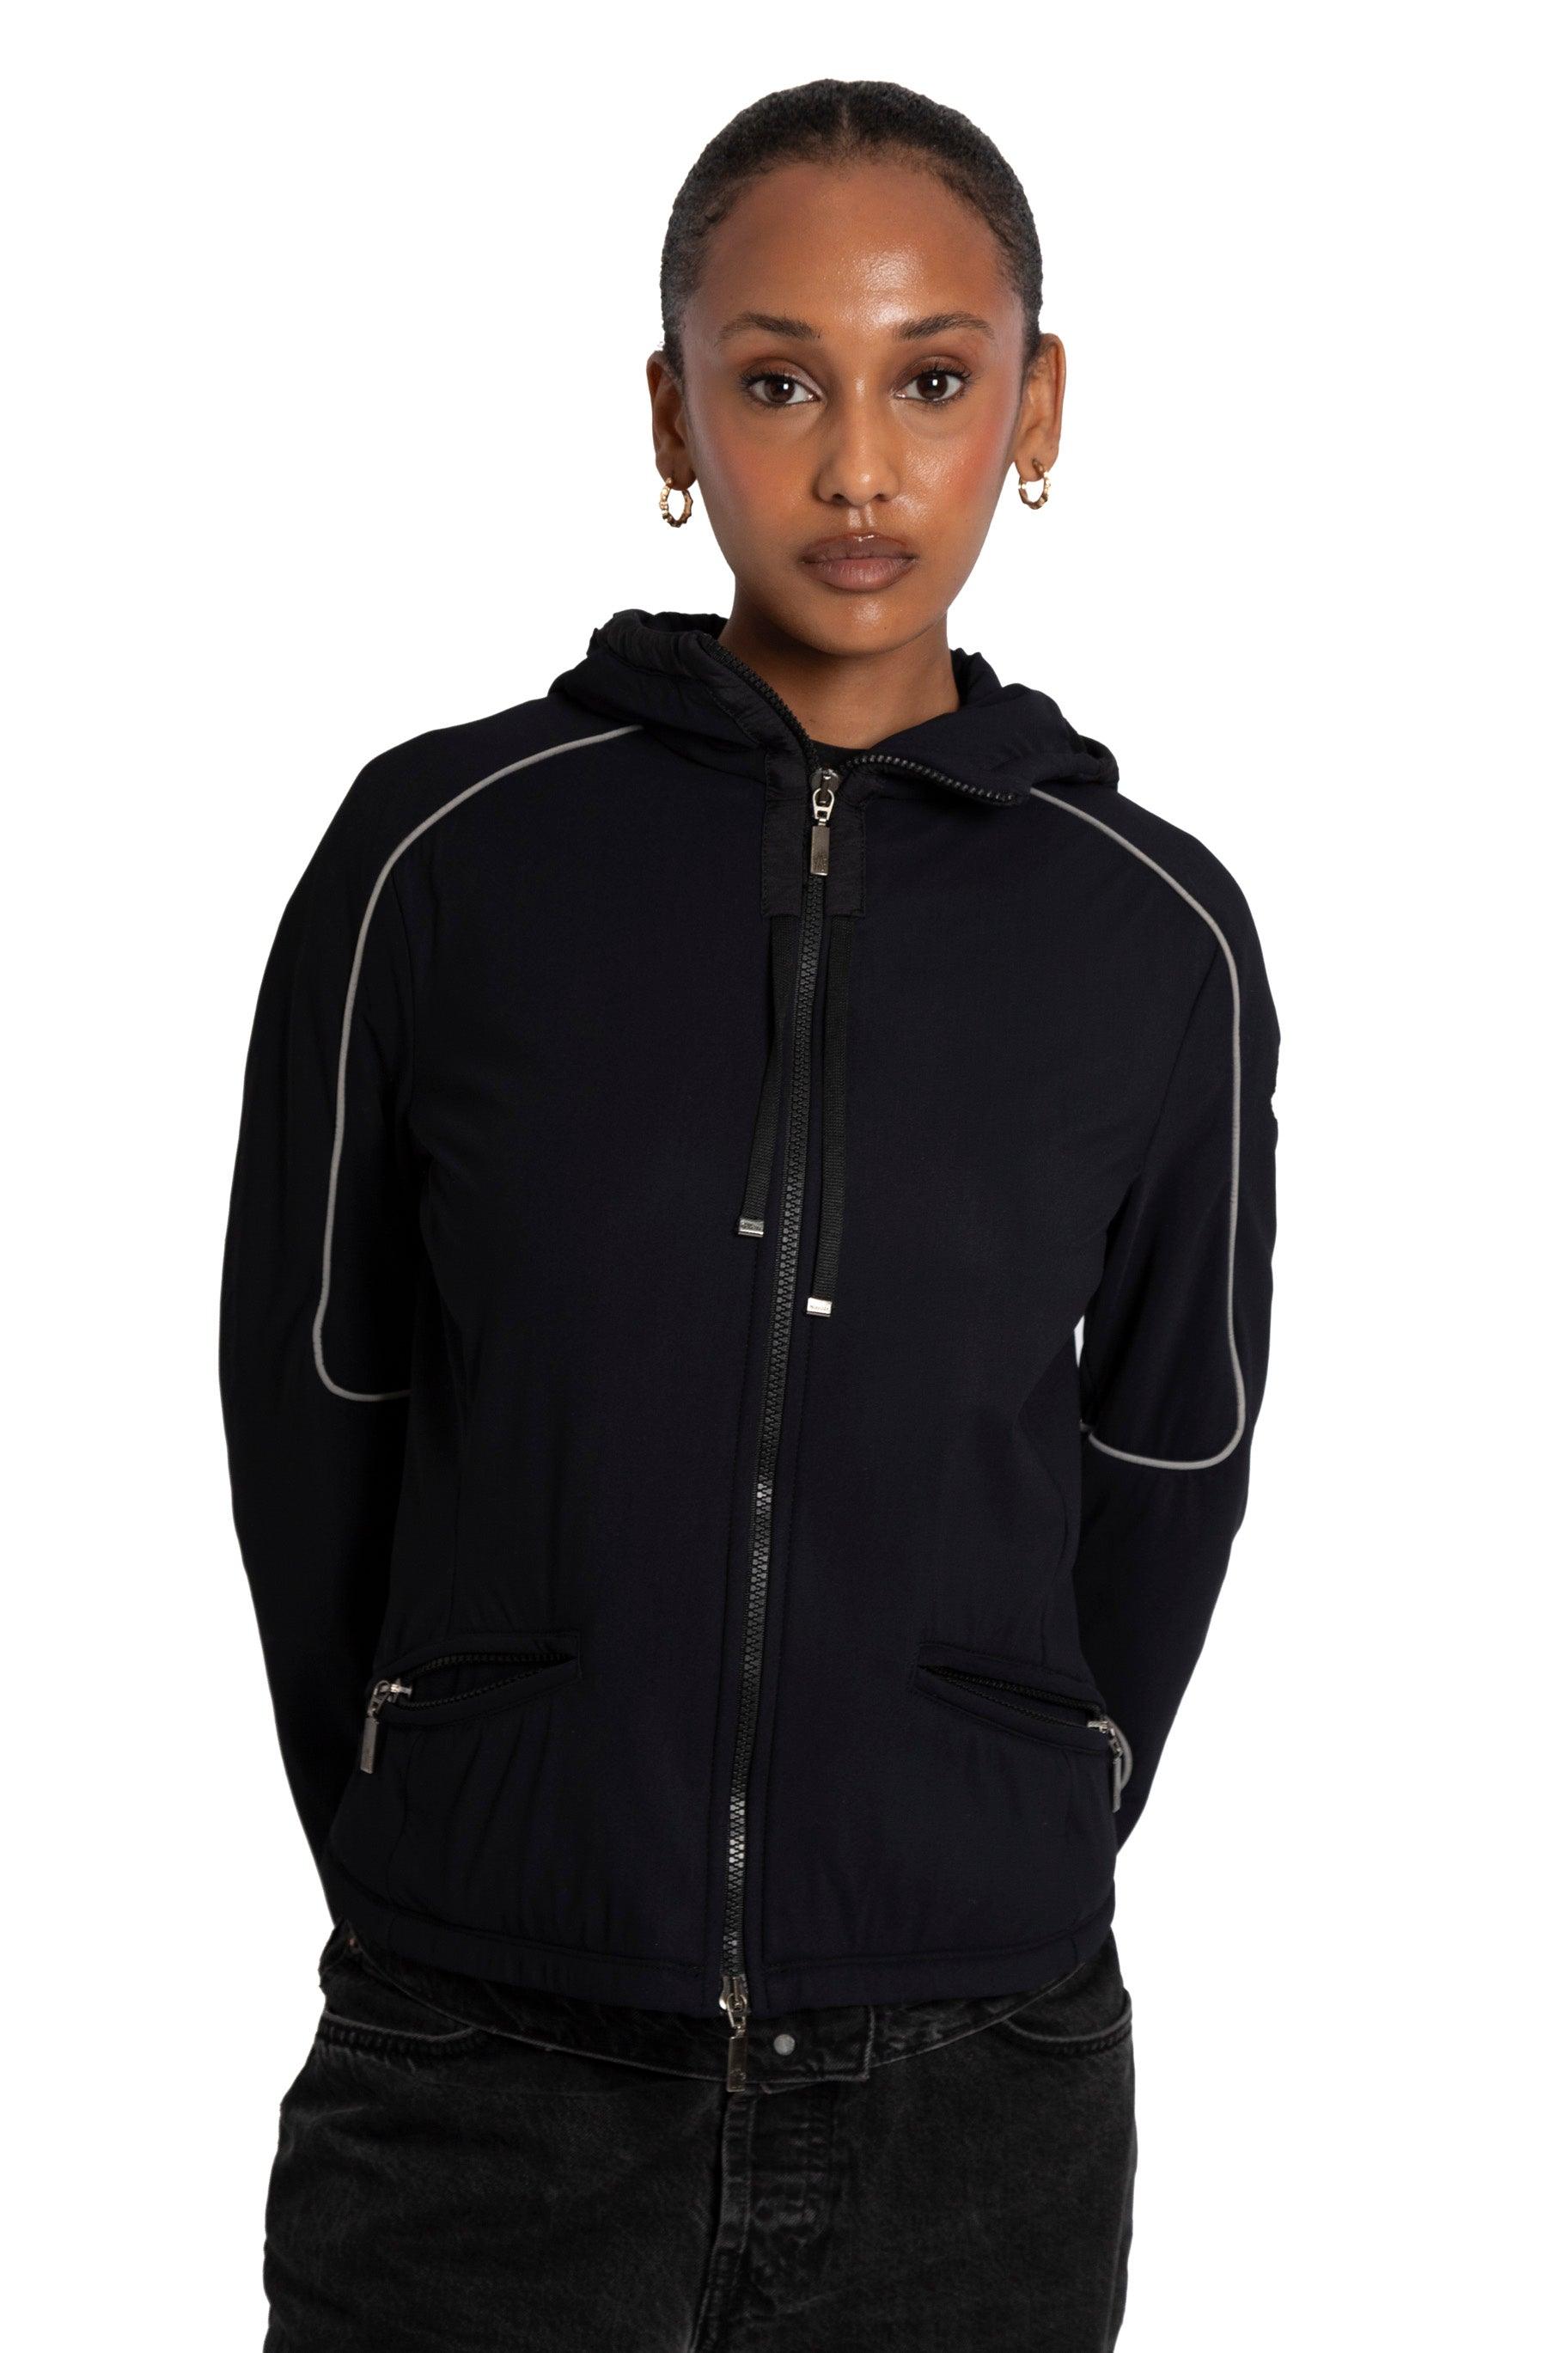 Moncler Softshell Hooded Tech Jacket Black - Known Source